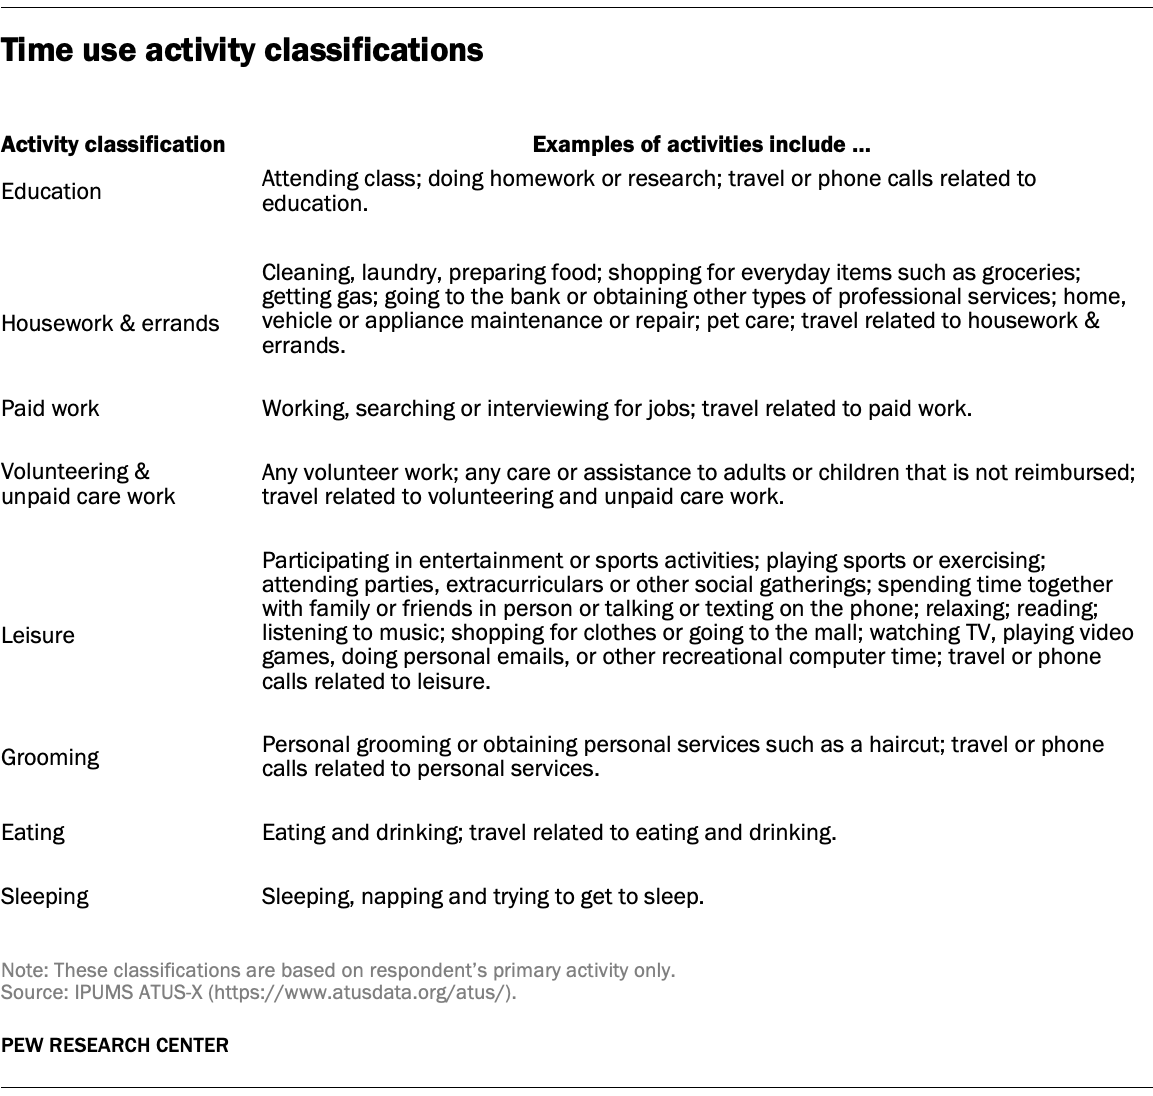 Time use activity classifications